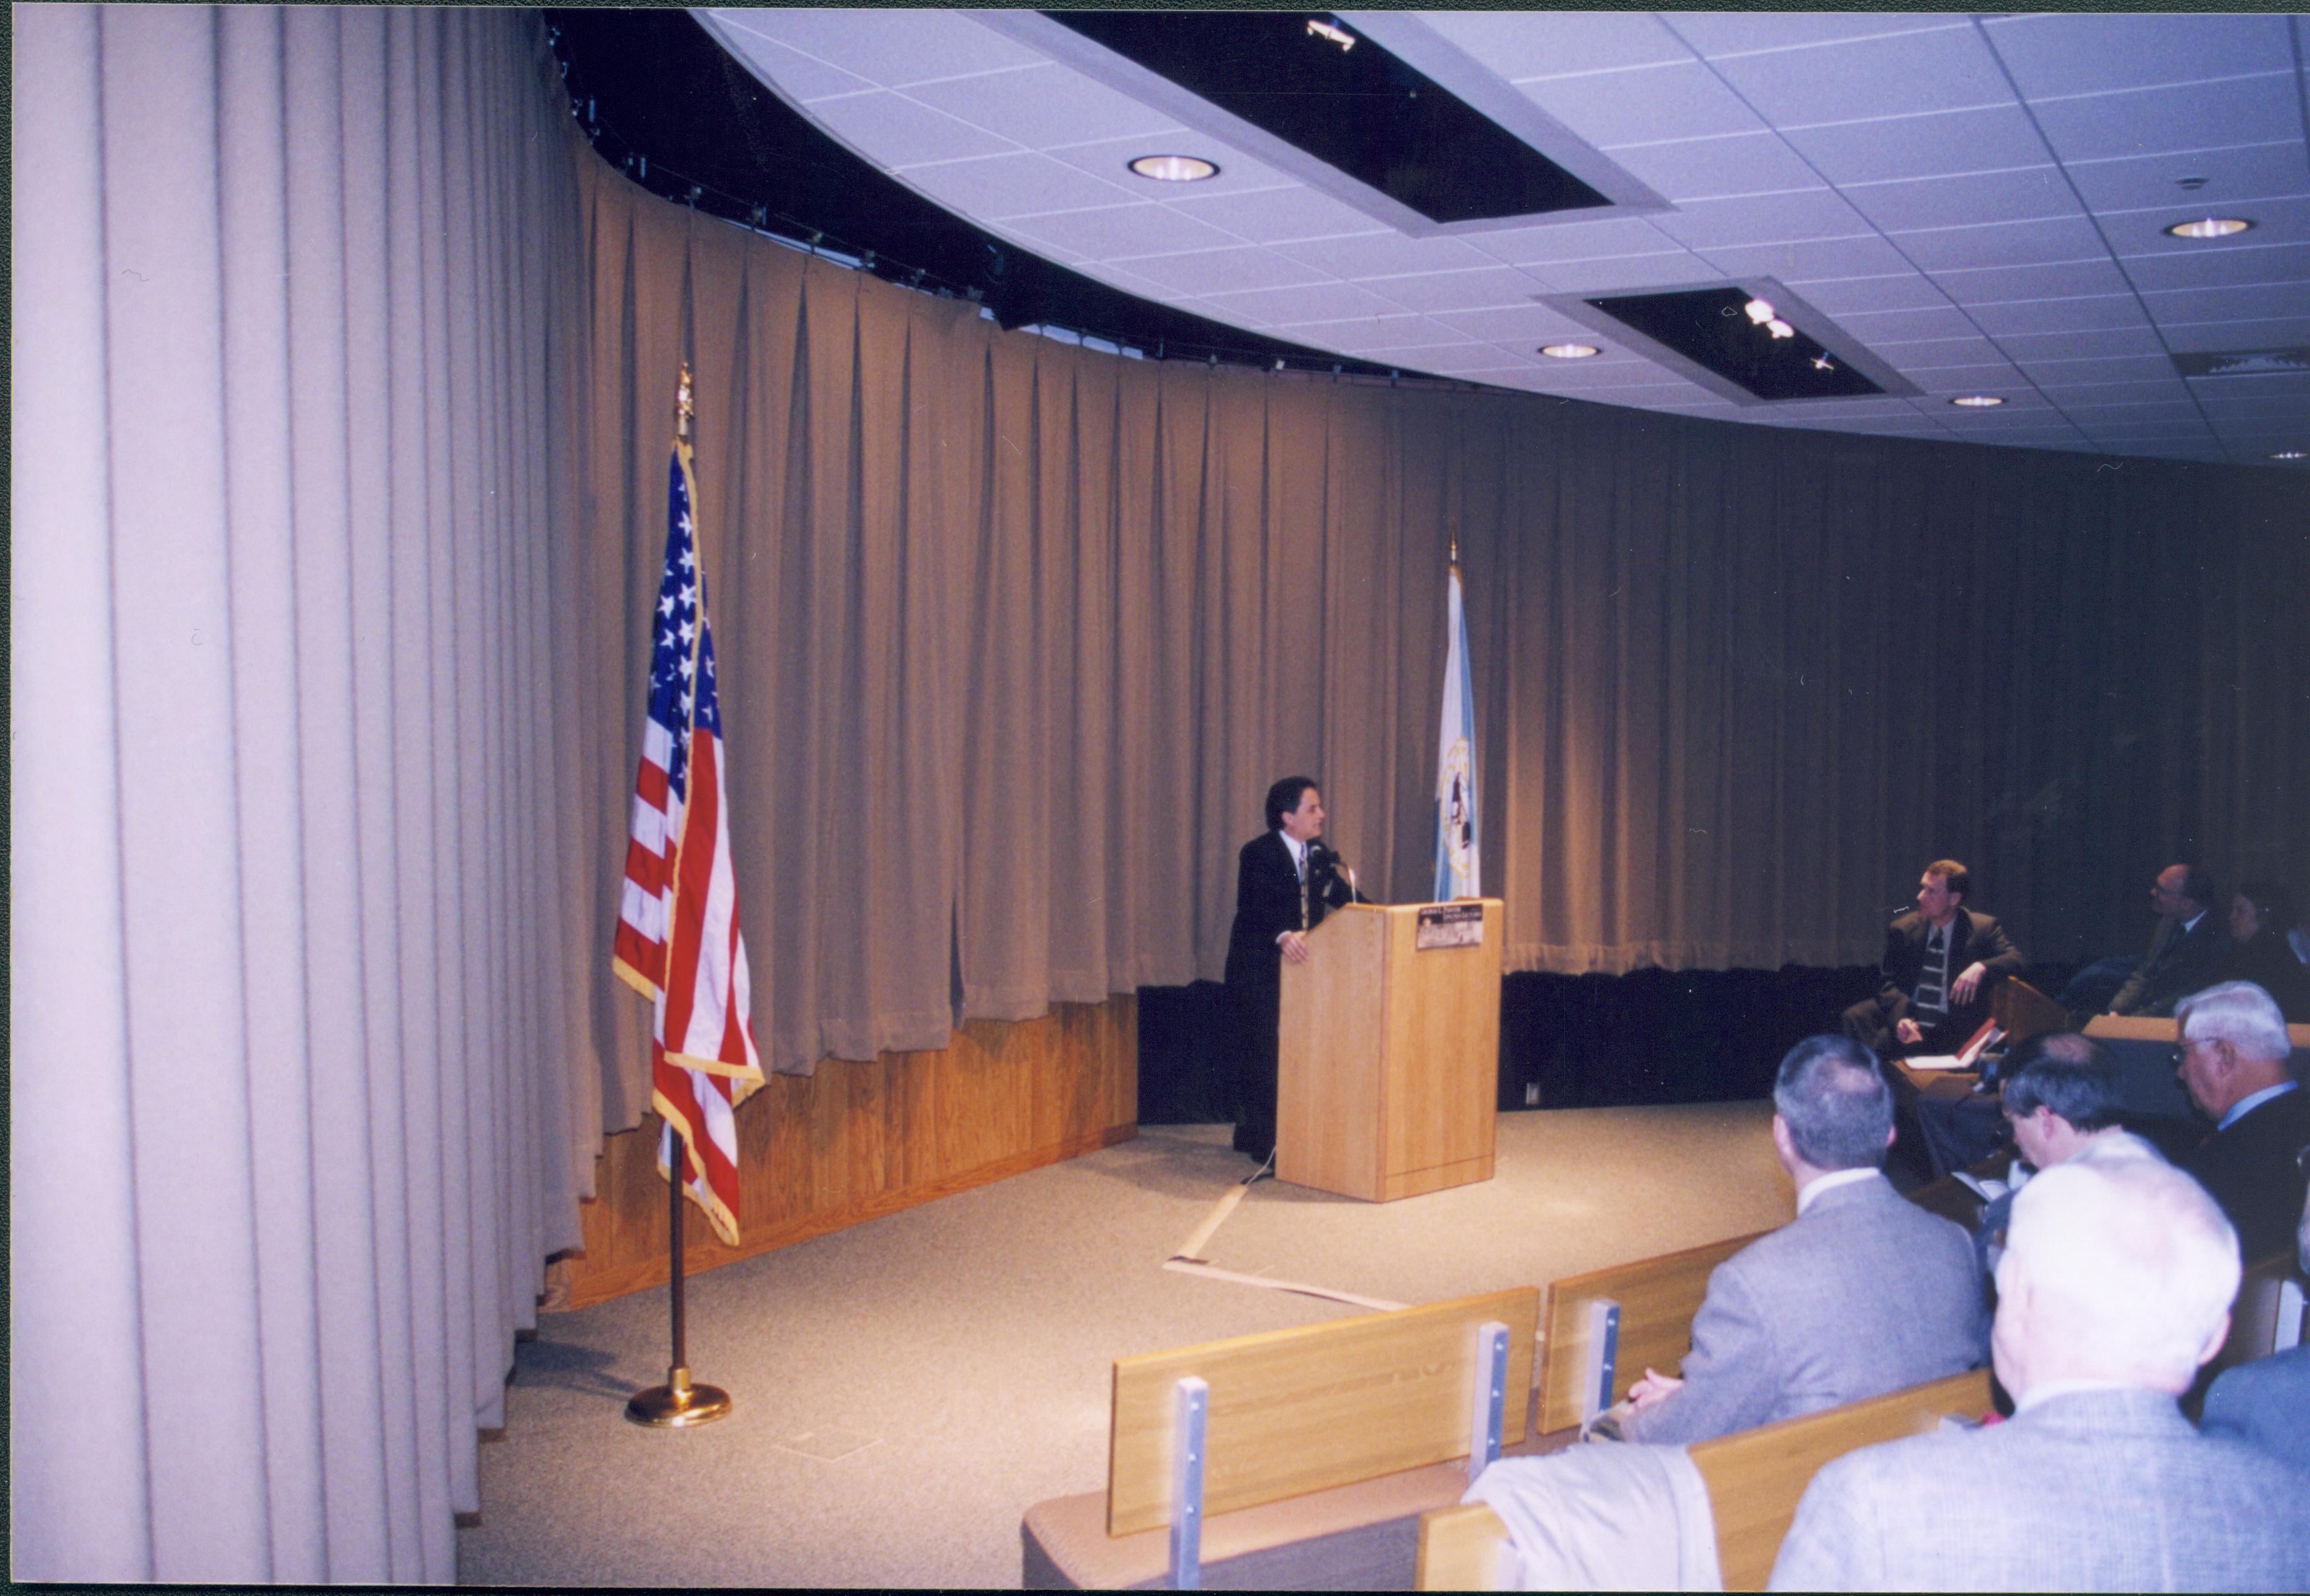 Lincoln's Birthday - Speaker Bruce Levine delivers a lecture to crowd in Visitor Center Theater 1. Historian Tim Townsend listens from front row right. Looking West from side of Theater 1. Lincoln's Birthday, Theater 1, Visitor Center, visitors, staff, lecture, flags, podium